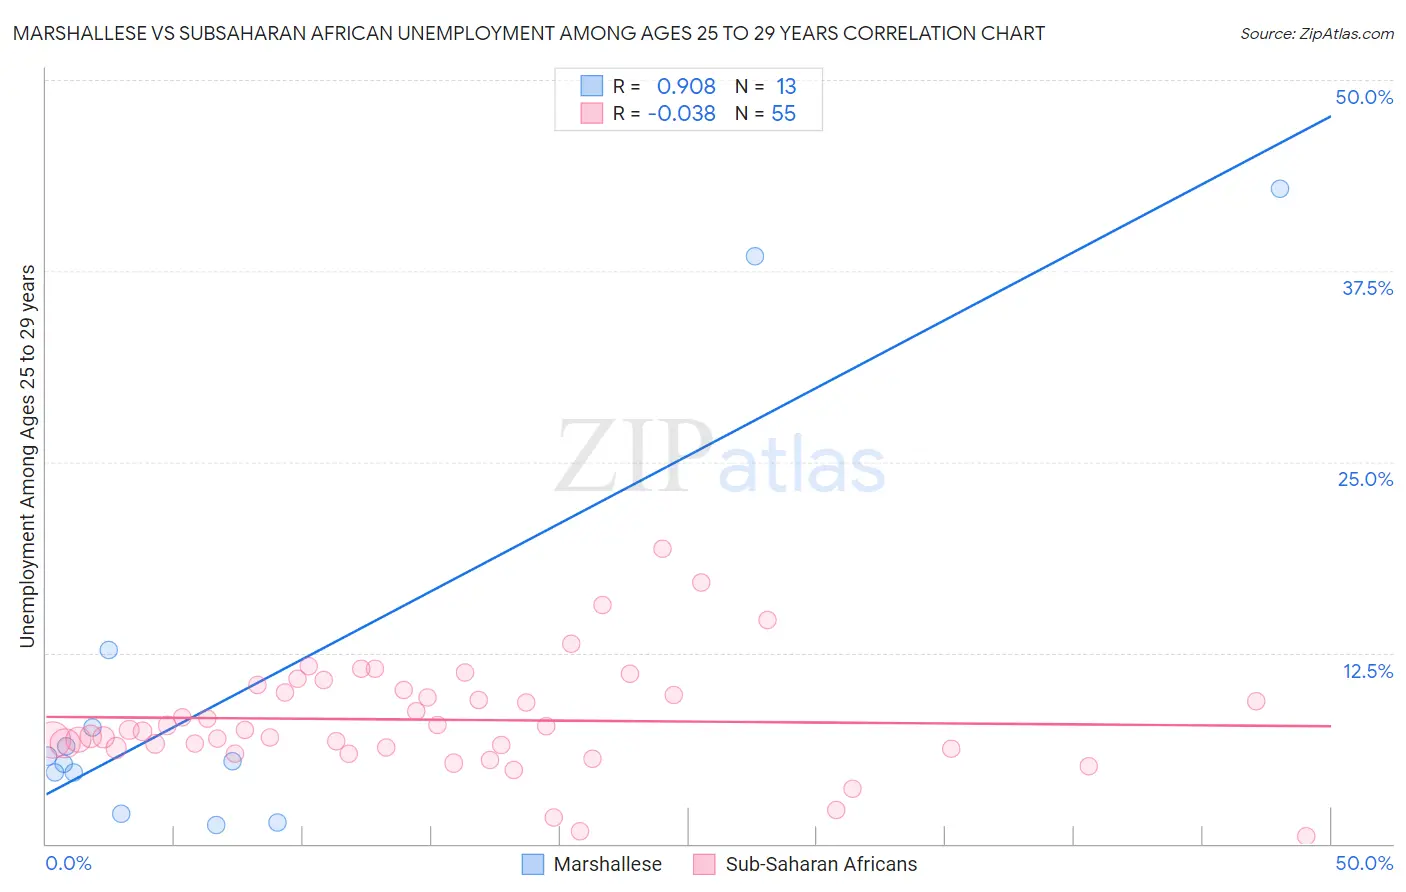 Marshallese vs Subsaharan African Unemployment Among Ages 25 to 29 years